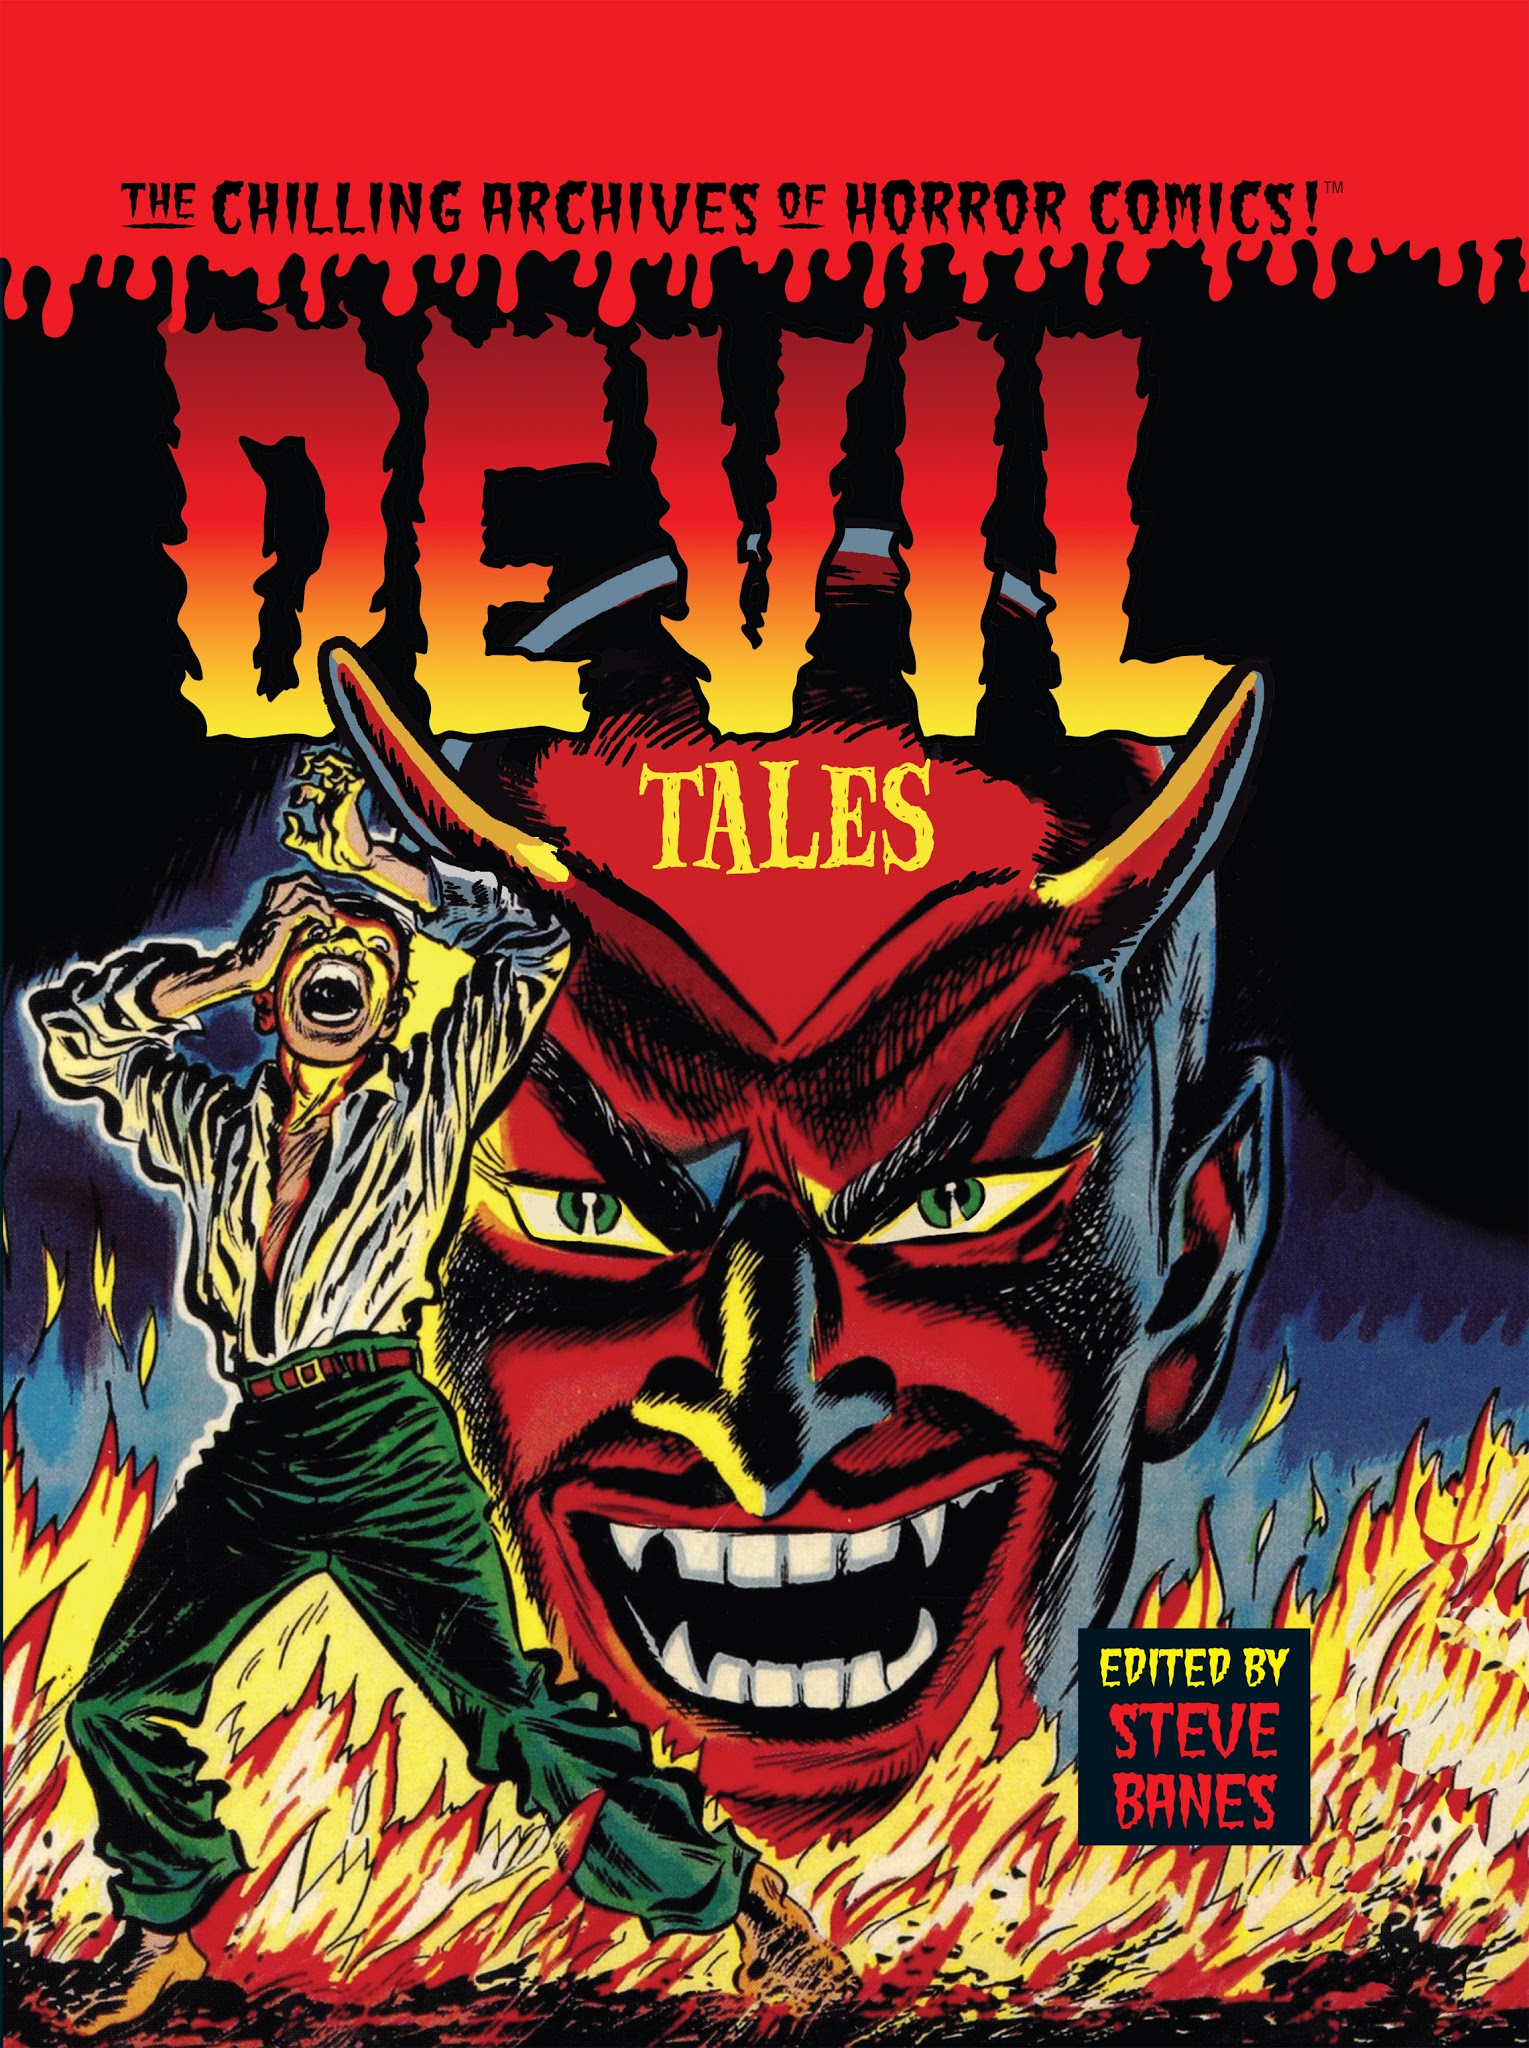 Read online Chilling Archives of Horror Comics comic -  Issue # TPB 14 - 1